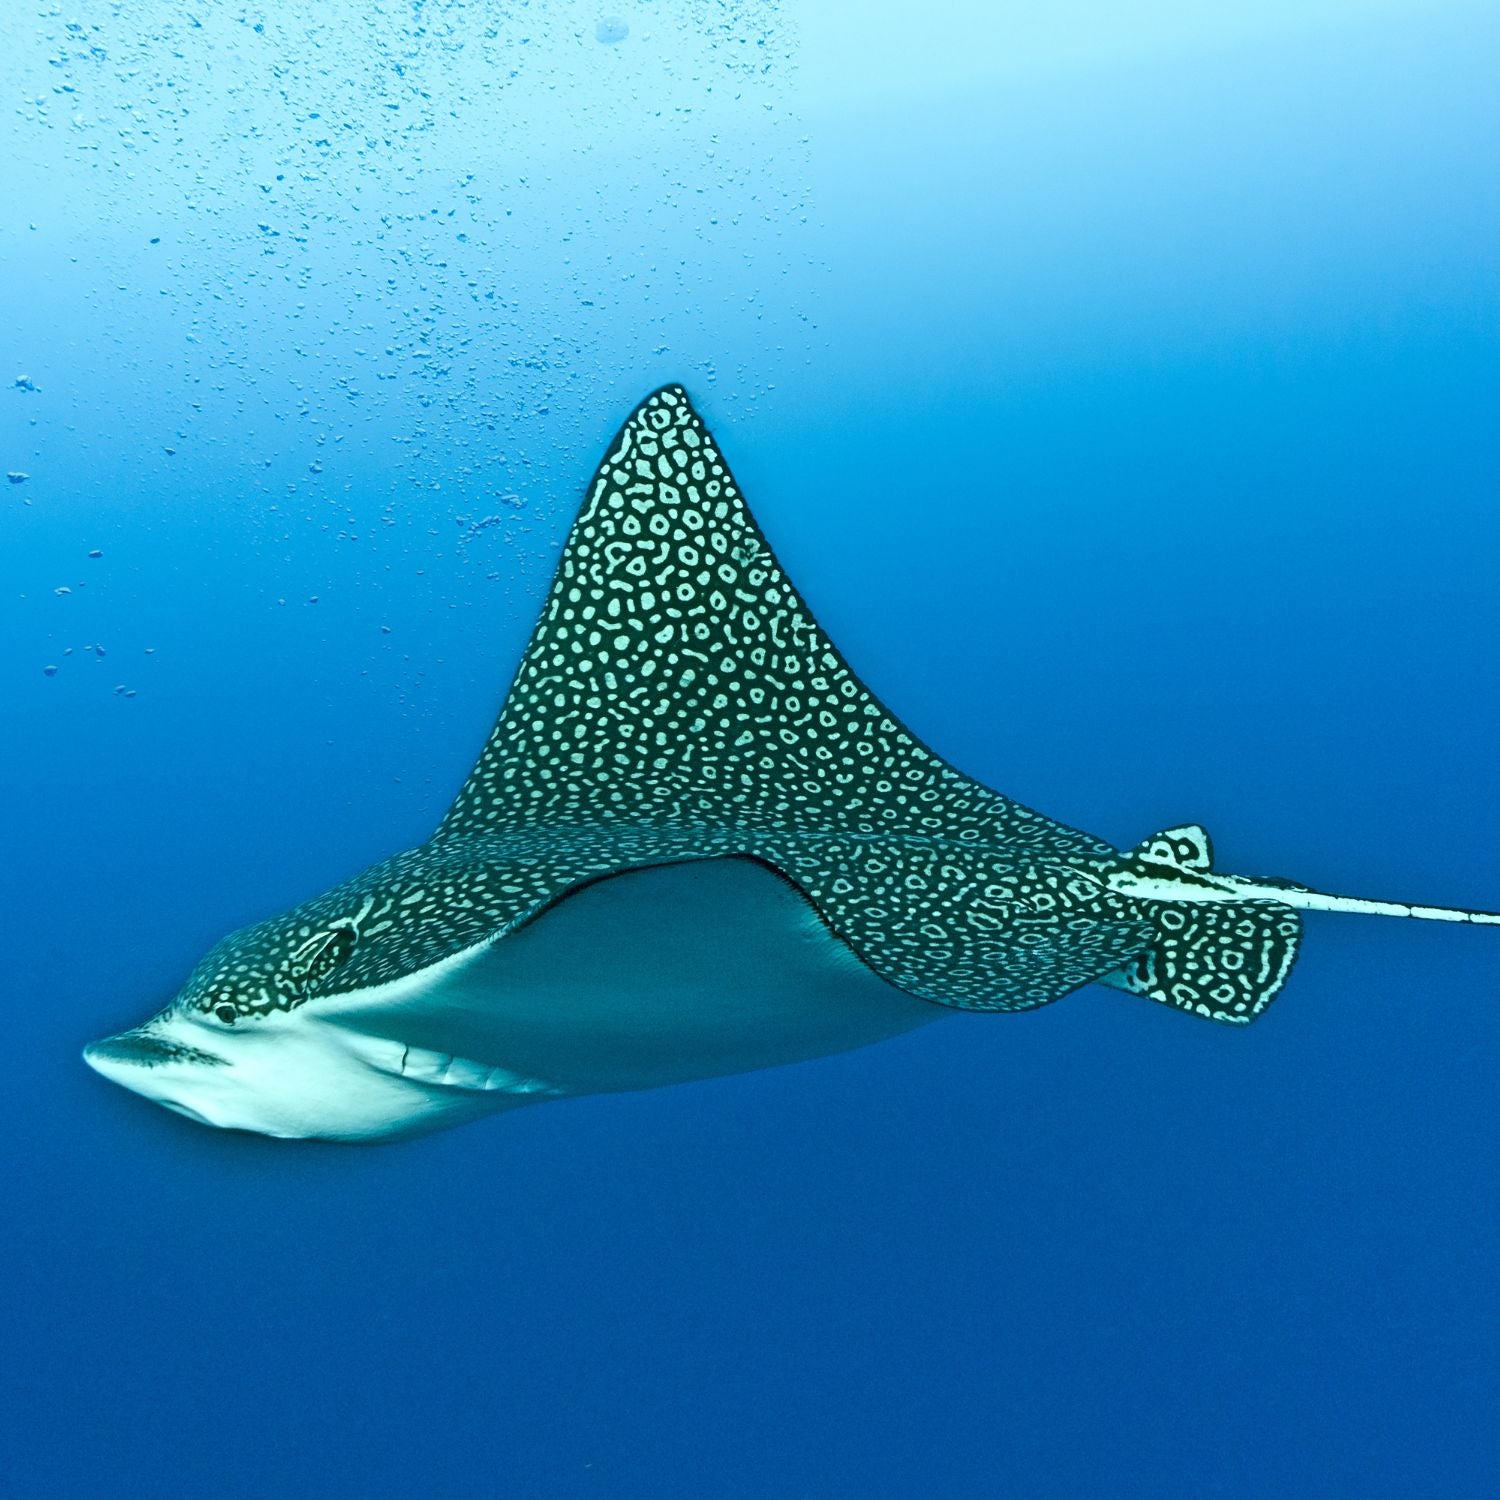 spotted eagle ray swimming in ocean